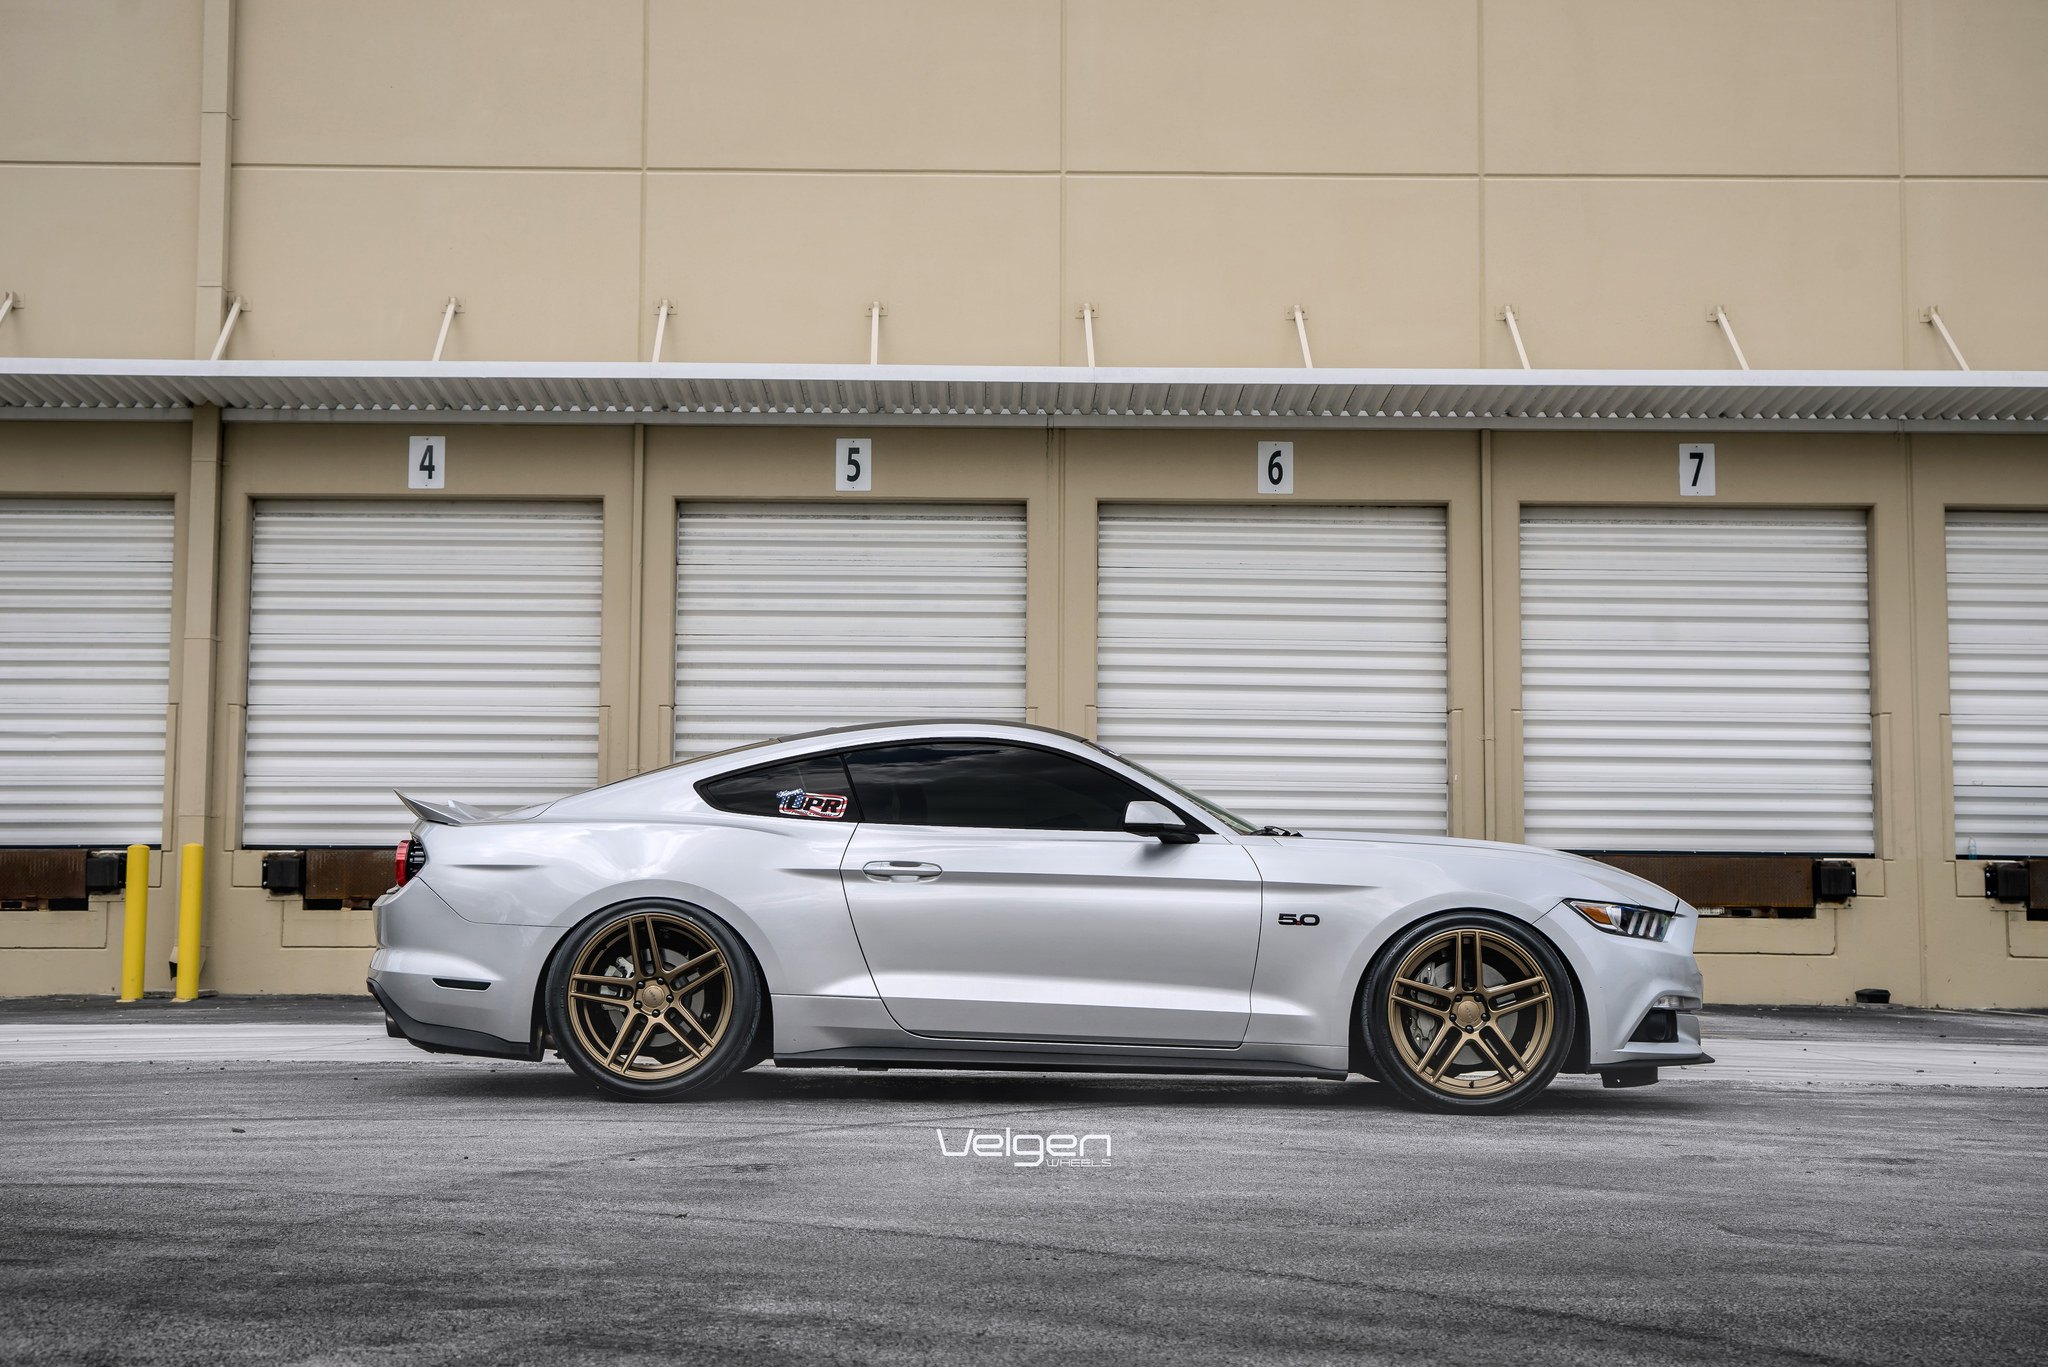 Aftermarket Side Skirts on Gray Ford Mustang 5.0 - Photo by Velgen